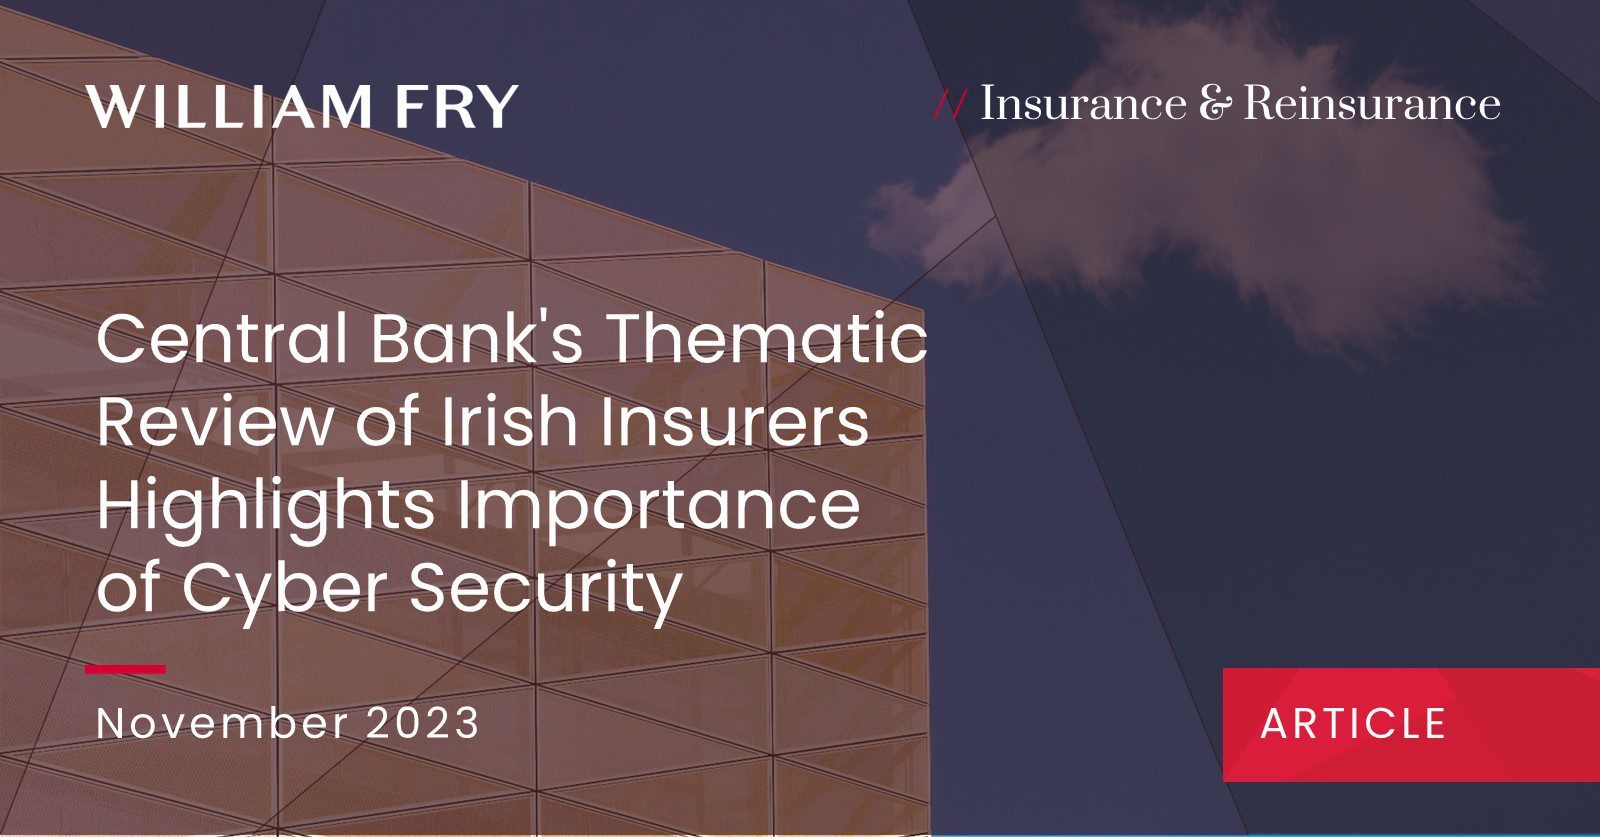 Central Bank's Thematic Review of Irish Insurers Highlights Importance of Cyber Security